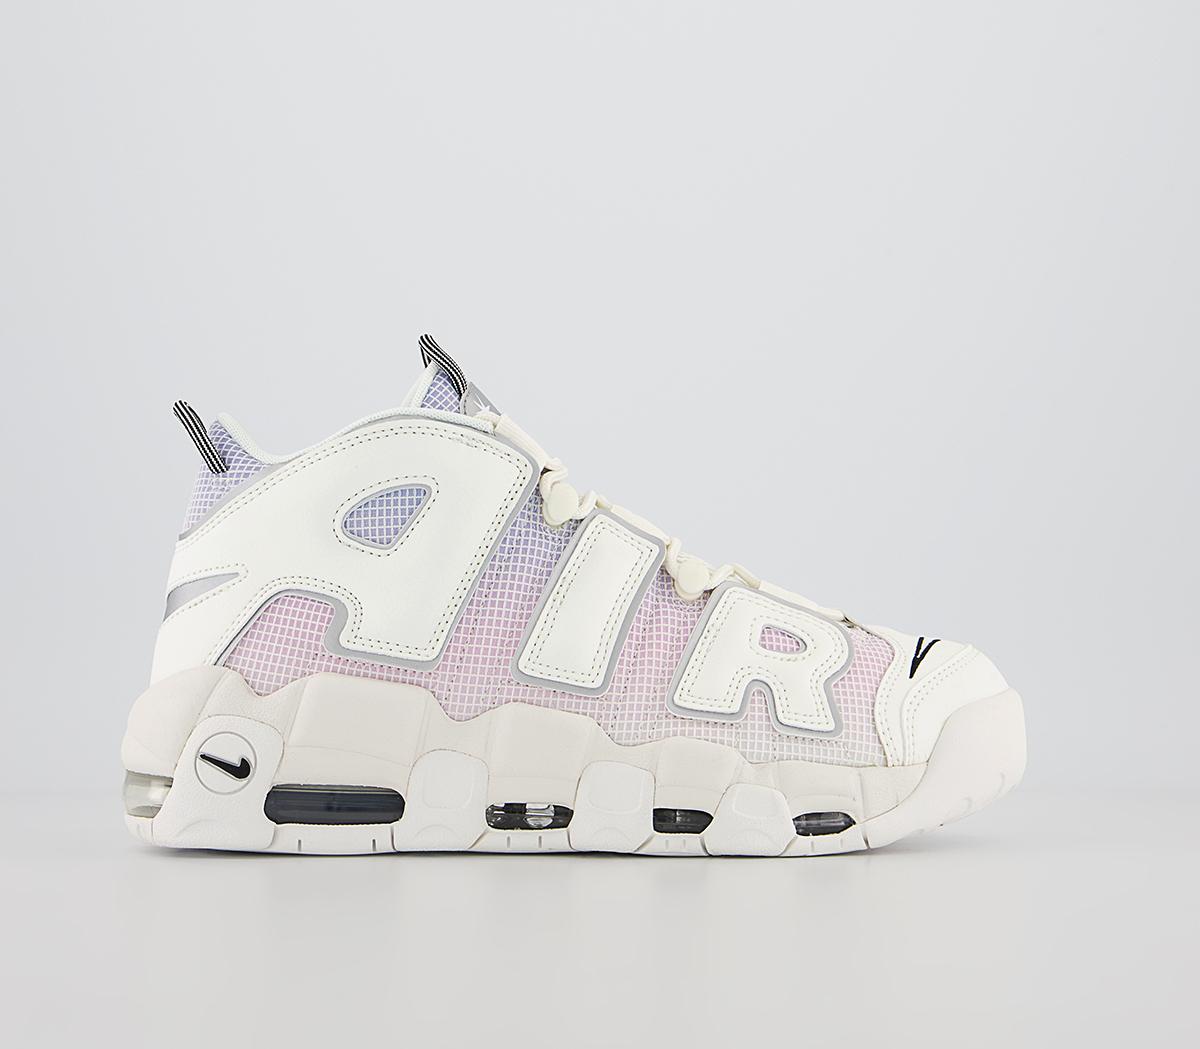 Nike Air More Uptempo: What You Need to Know